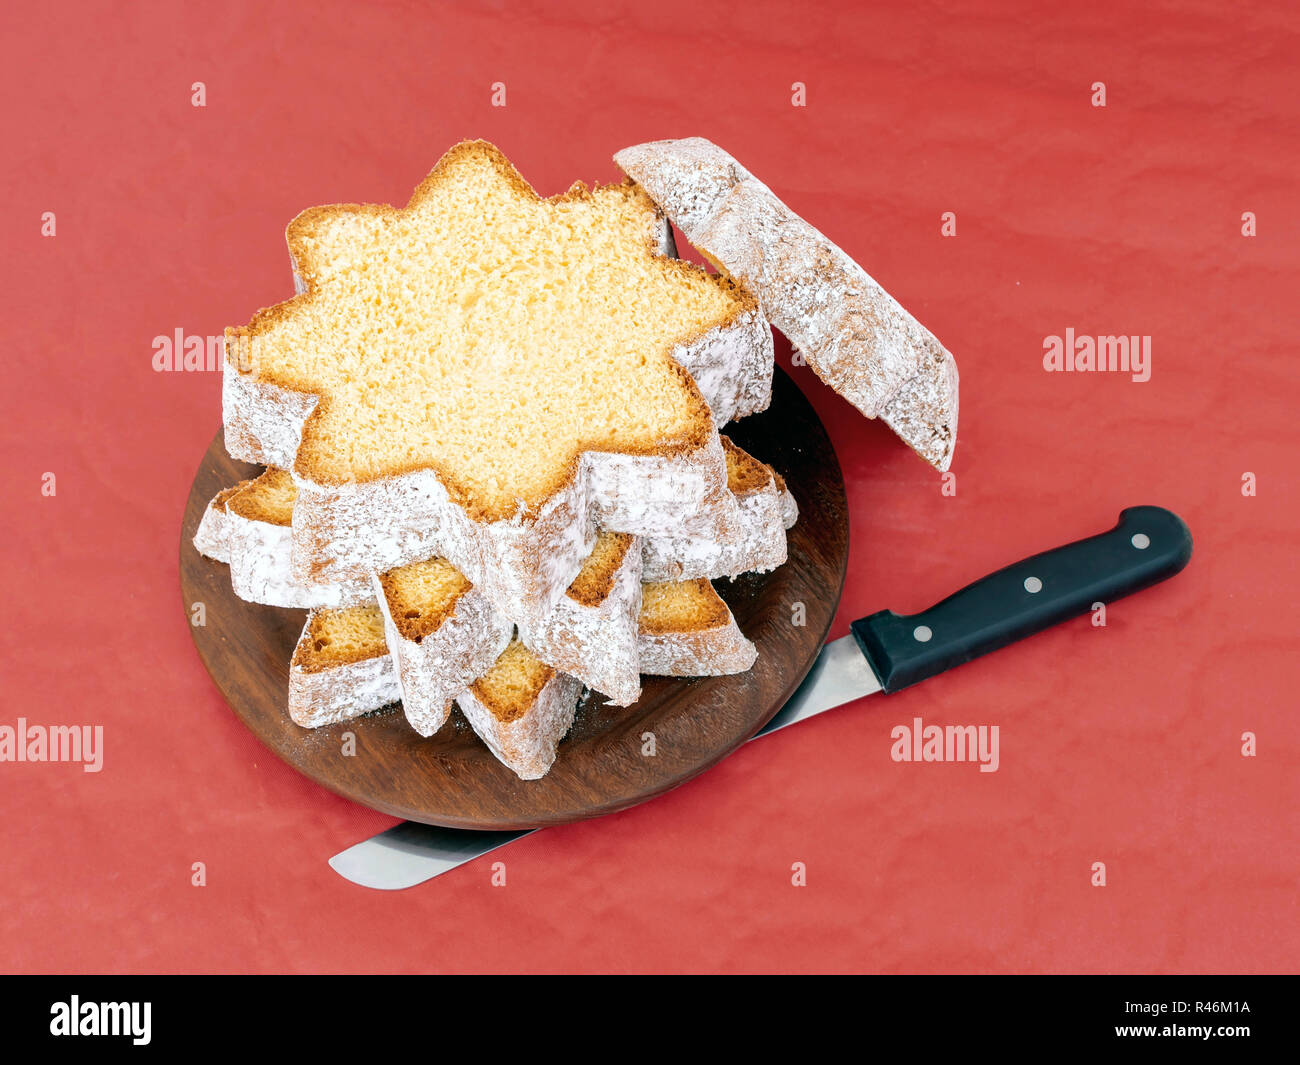 https://c8.alamy.com/comp/R46M1A/sliced-pandoro-italian-sweet-yeast-bread-traditional-christmas-treat-with-knife-on-red-overhead-flat-lay-view-R46M1A.jpg